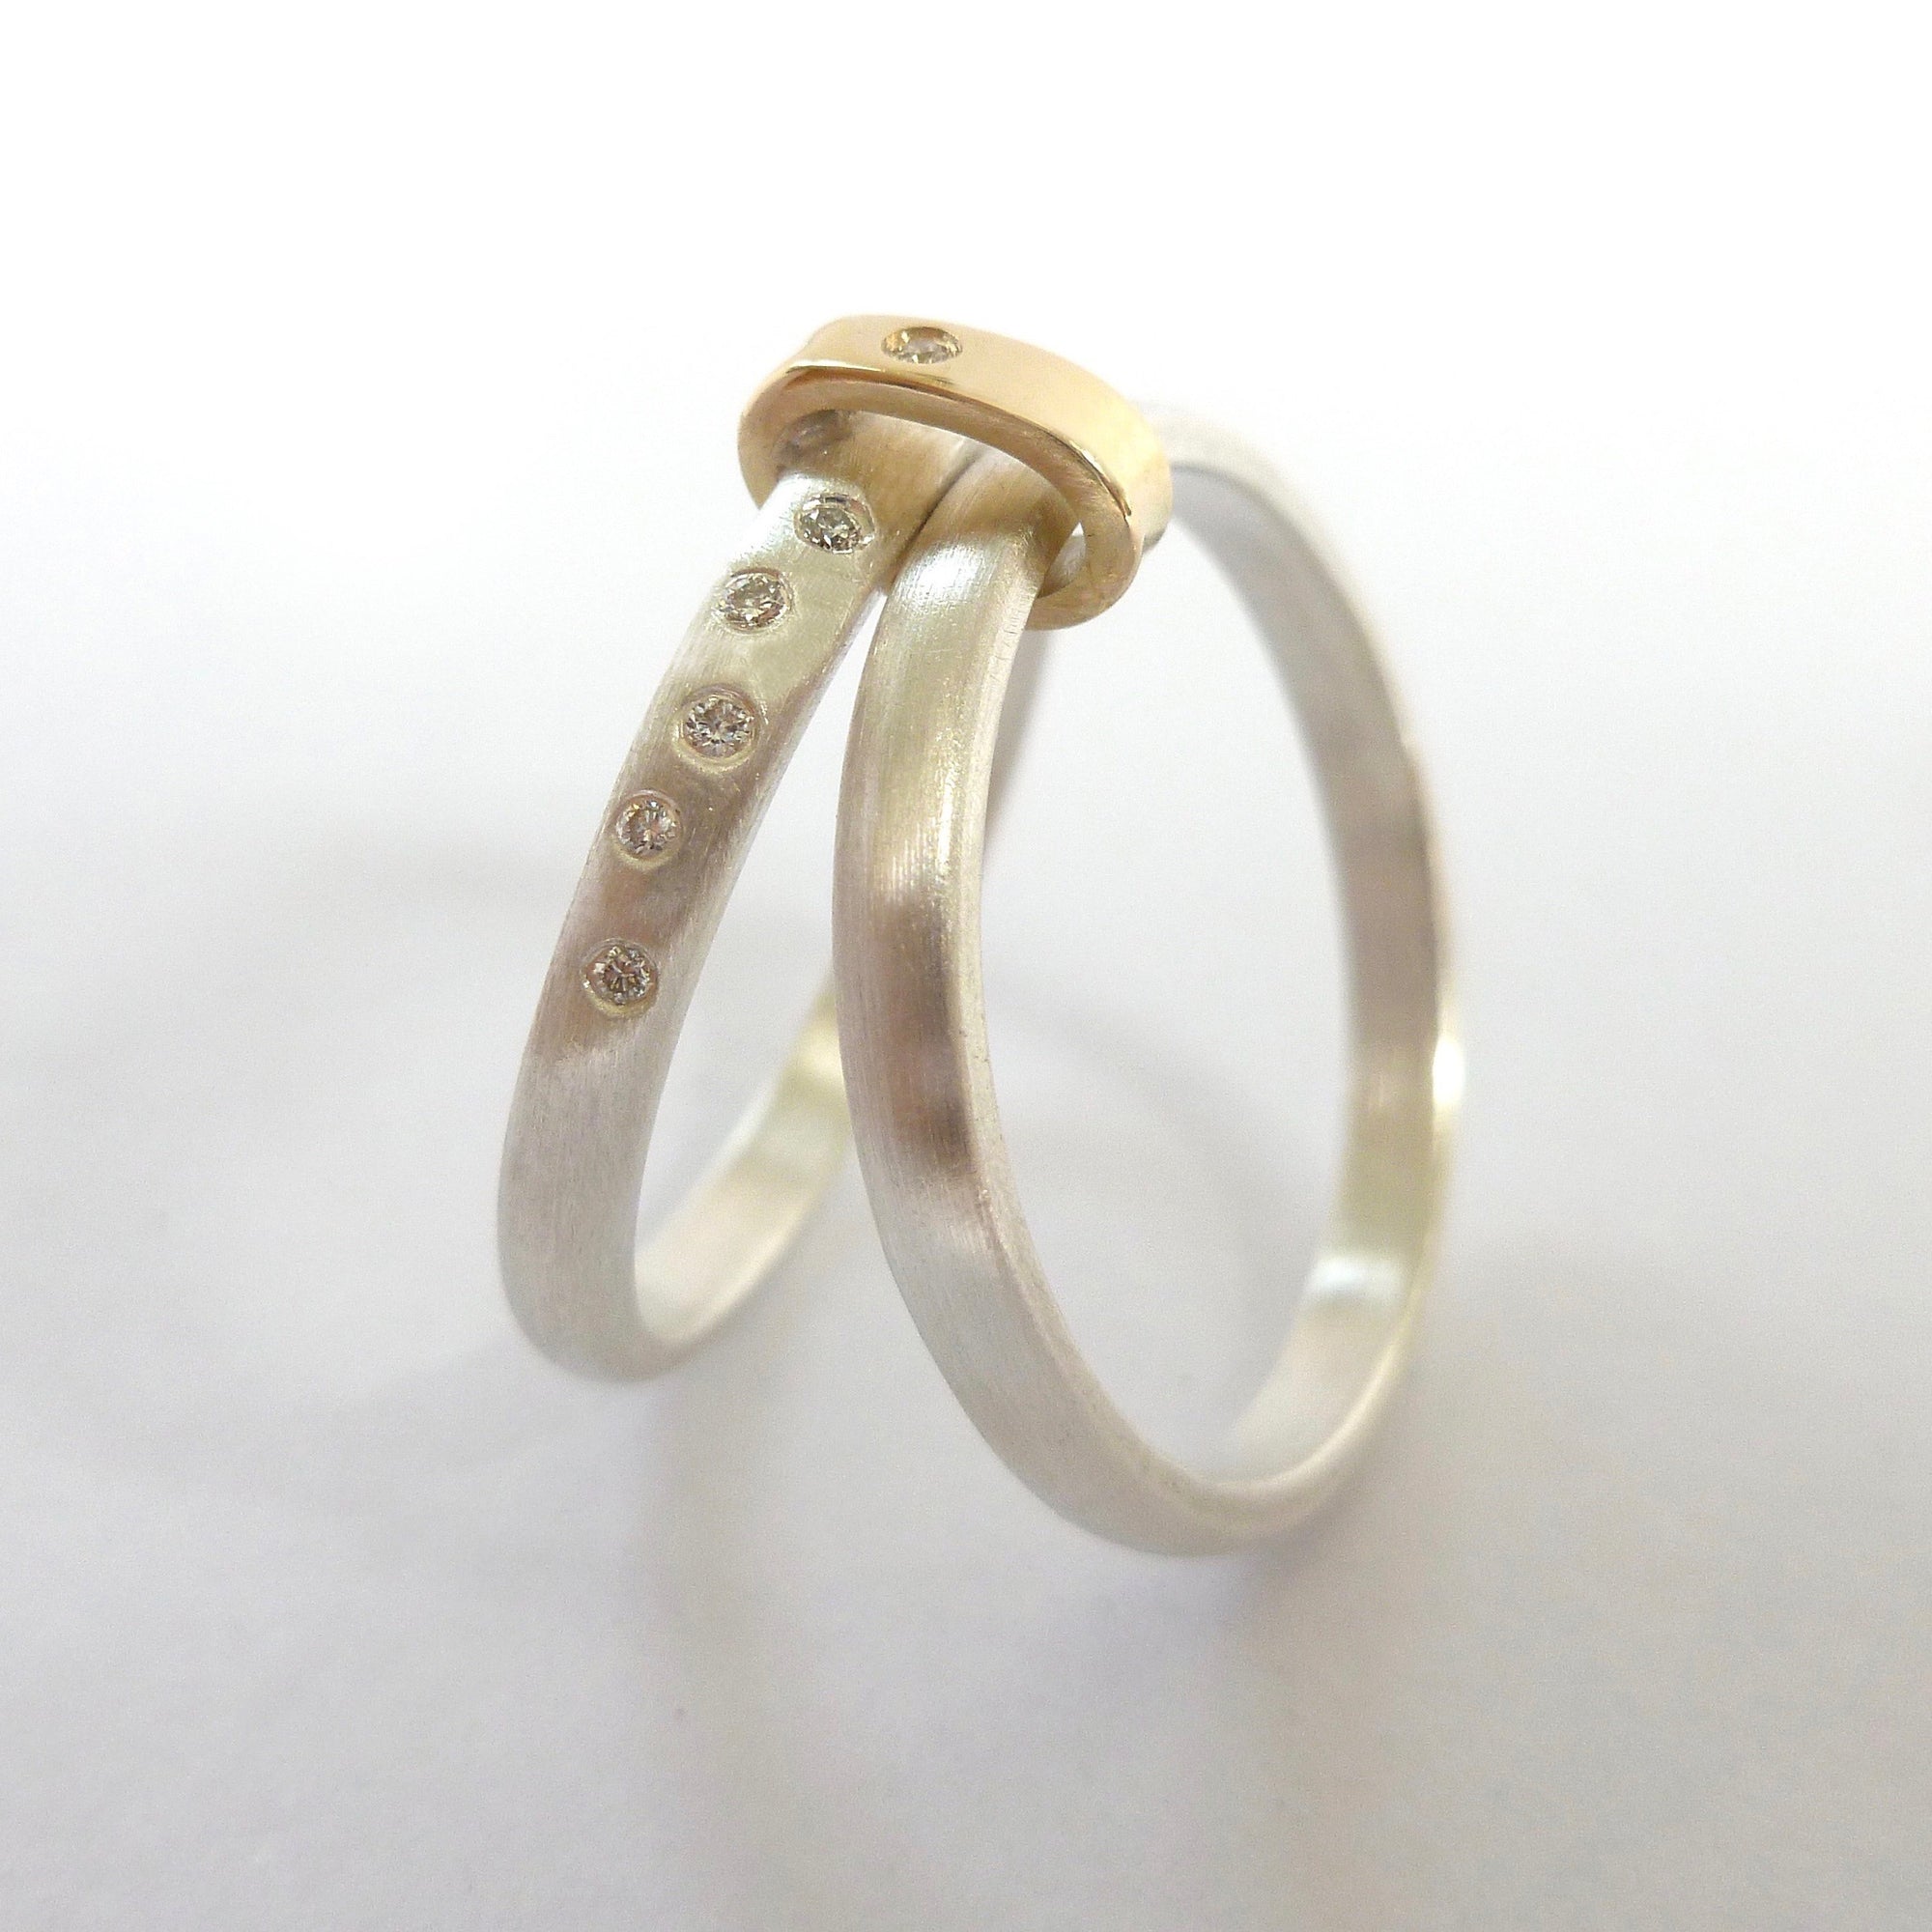 Two band silver and diamond ring